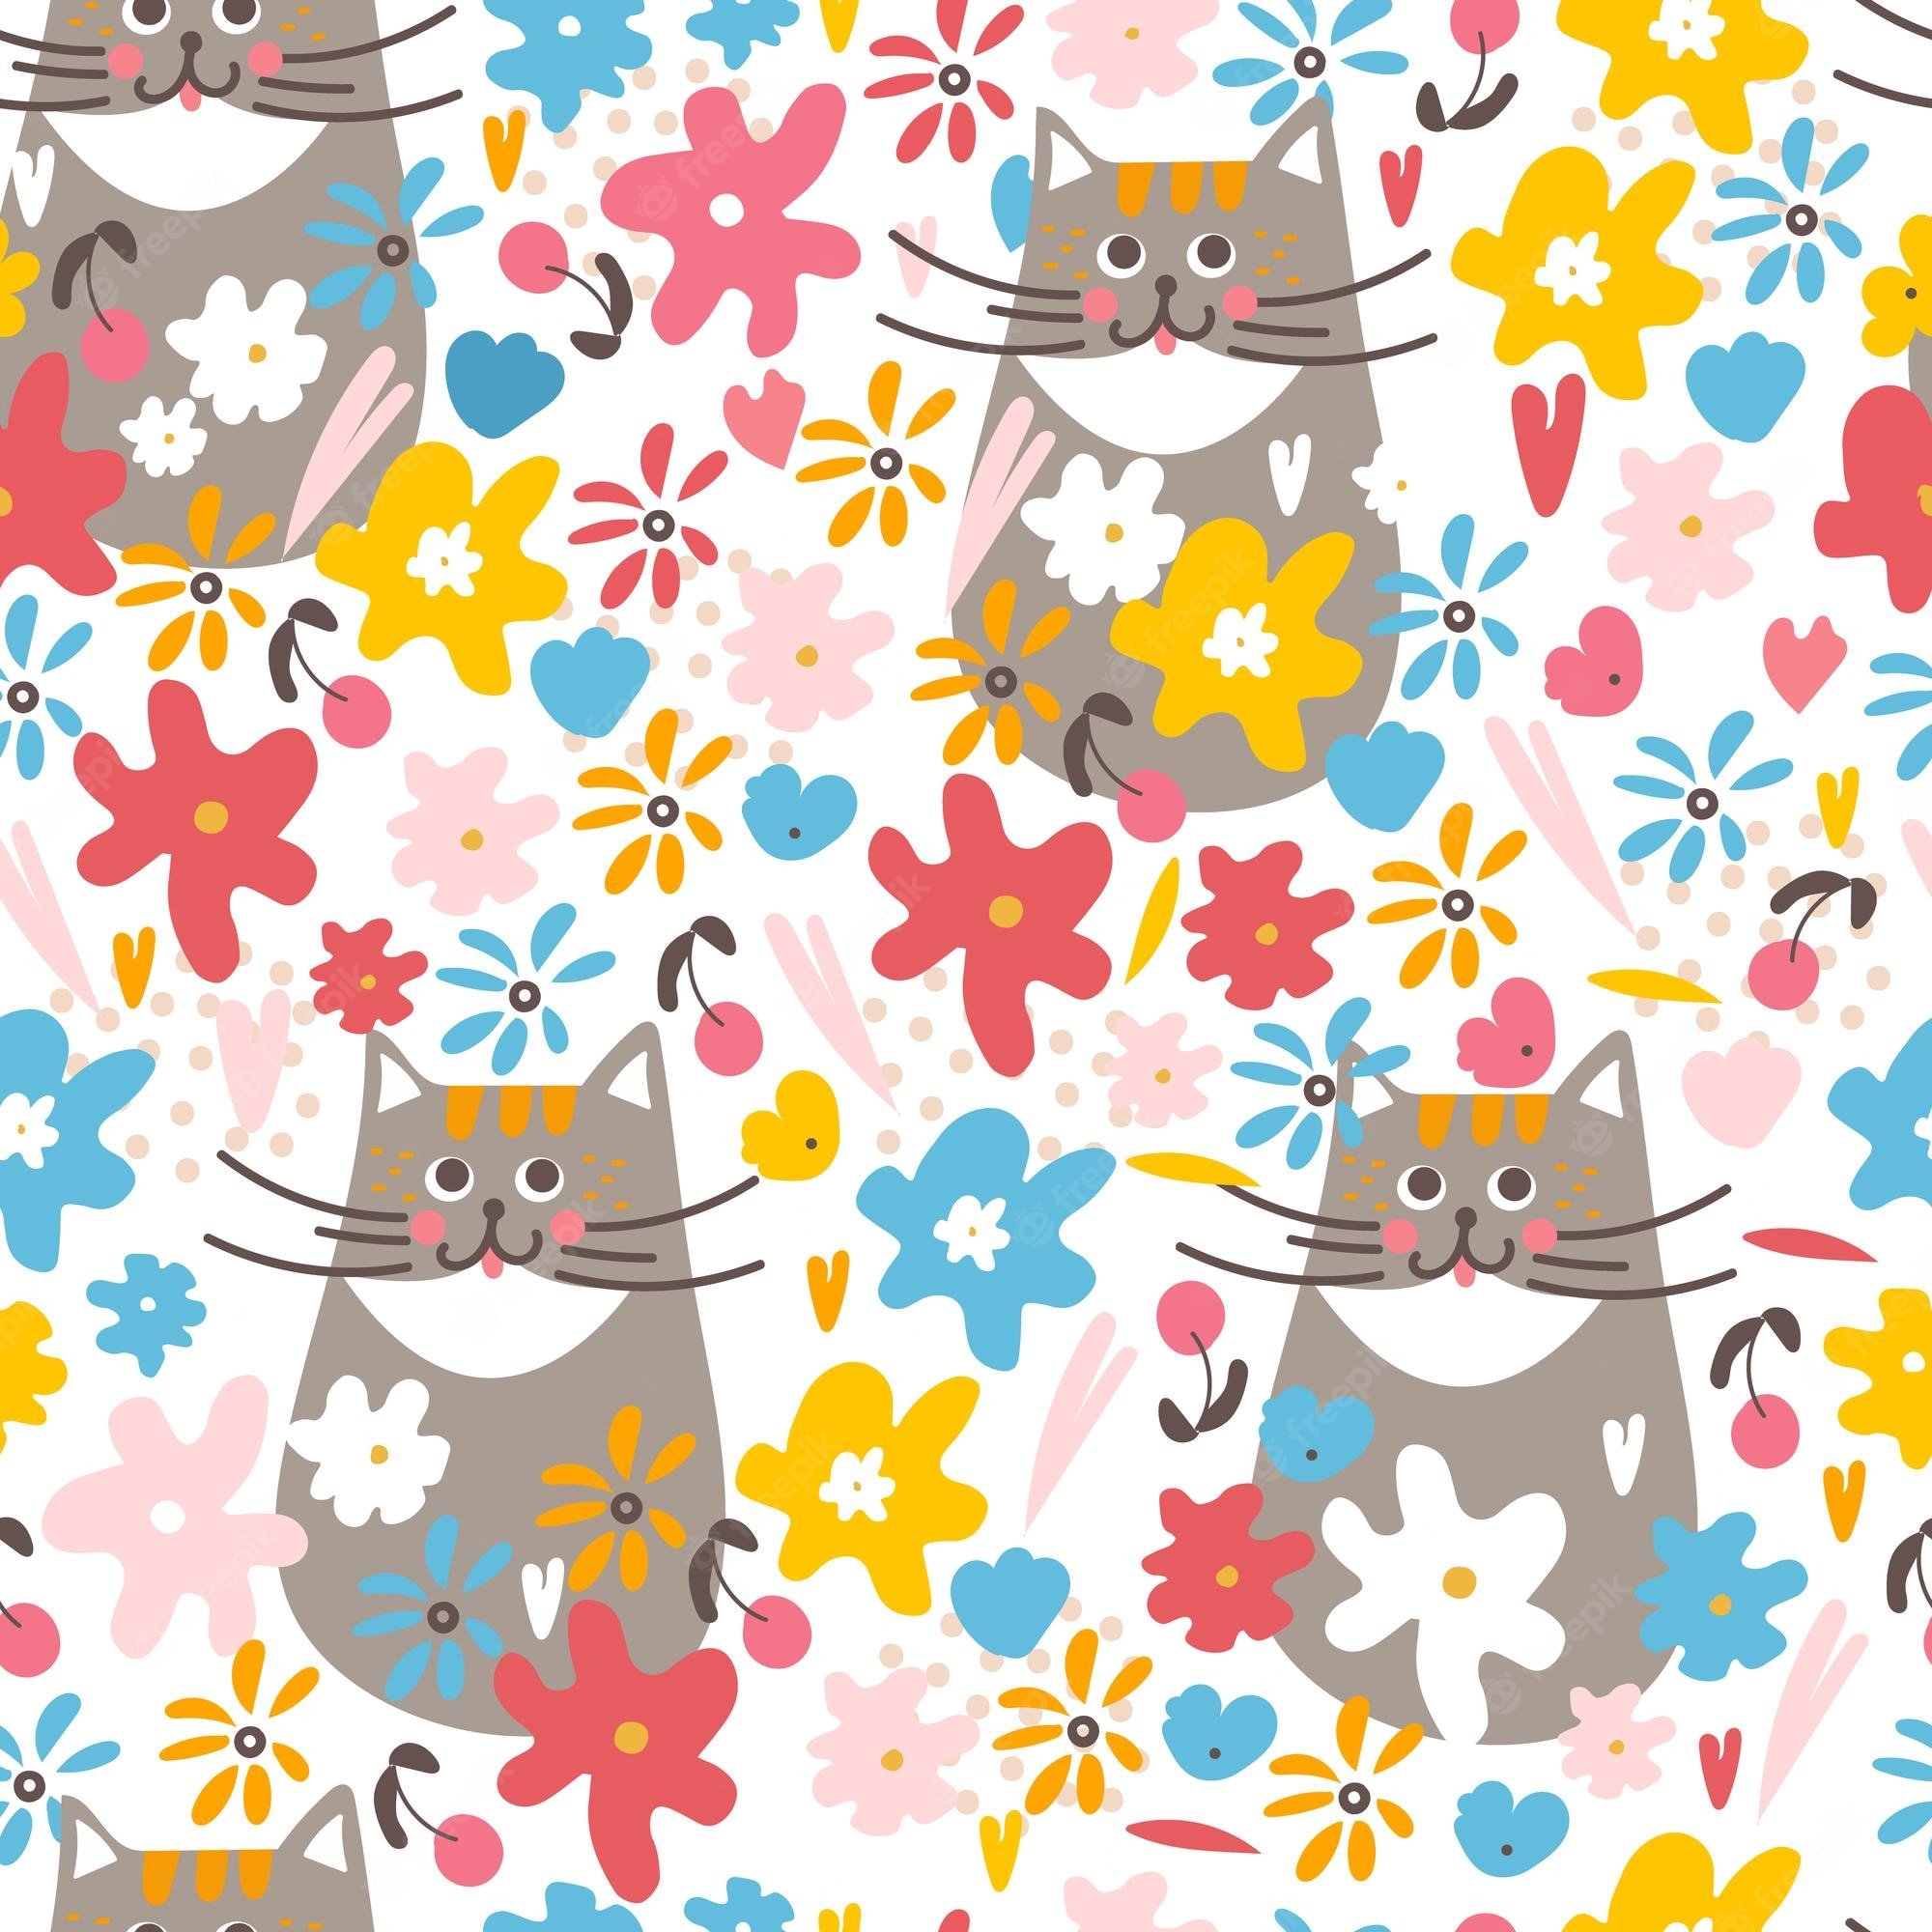 Premium Vector. Cat and flowers seamless pattern summer background print for printing on wallpaper fabric packaging vector illustration hand drawn